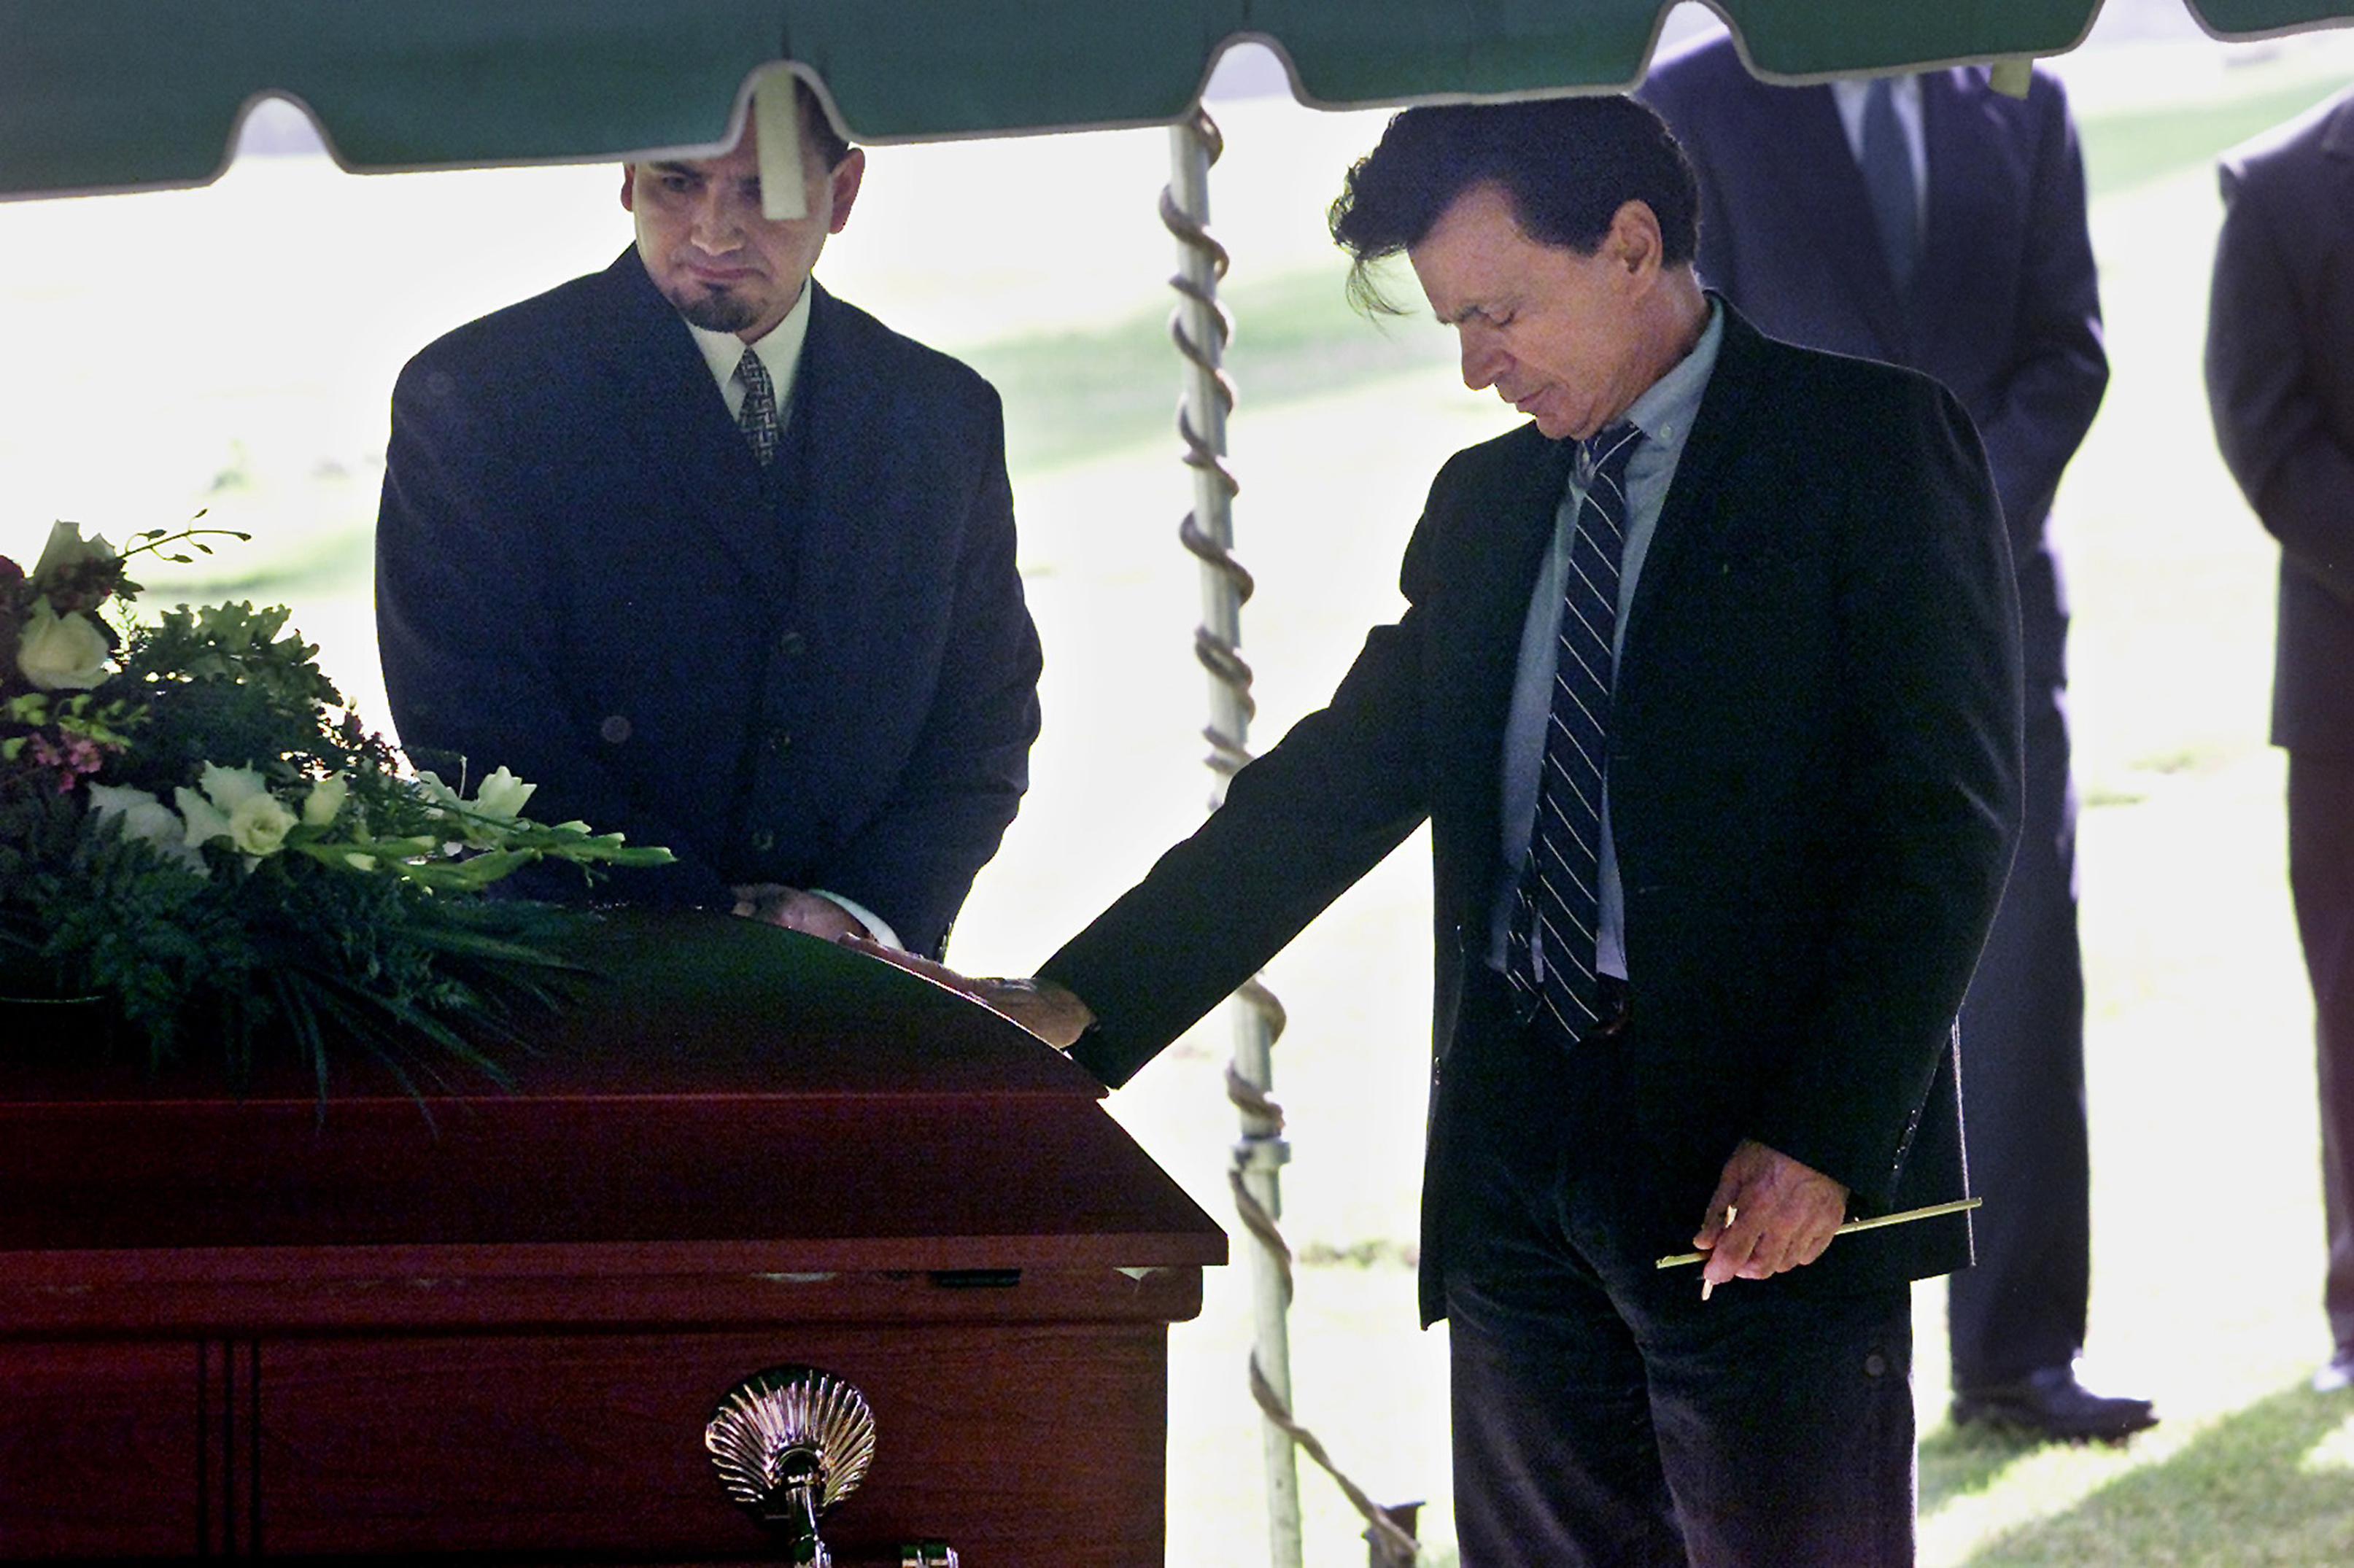 Robert Blake places a hand on the coffin of his wife, Bonny Lee Bakley, during a brief funeral ceremony on May 25, 2001, in Los Angeles, California | Source: Getty Images